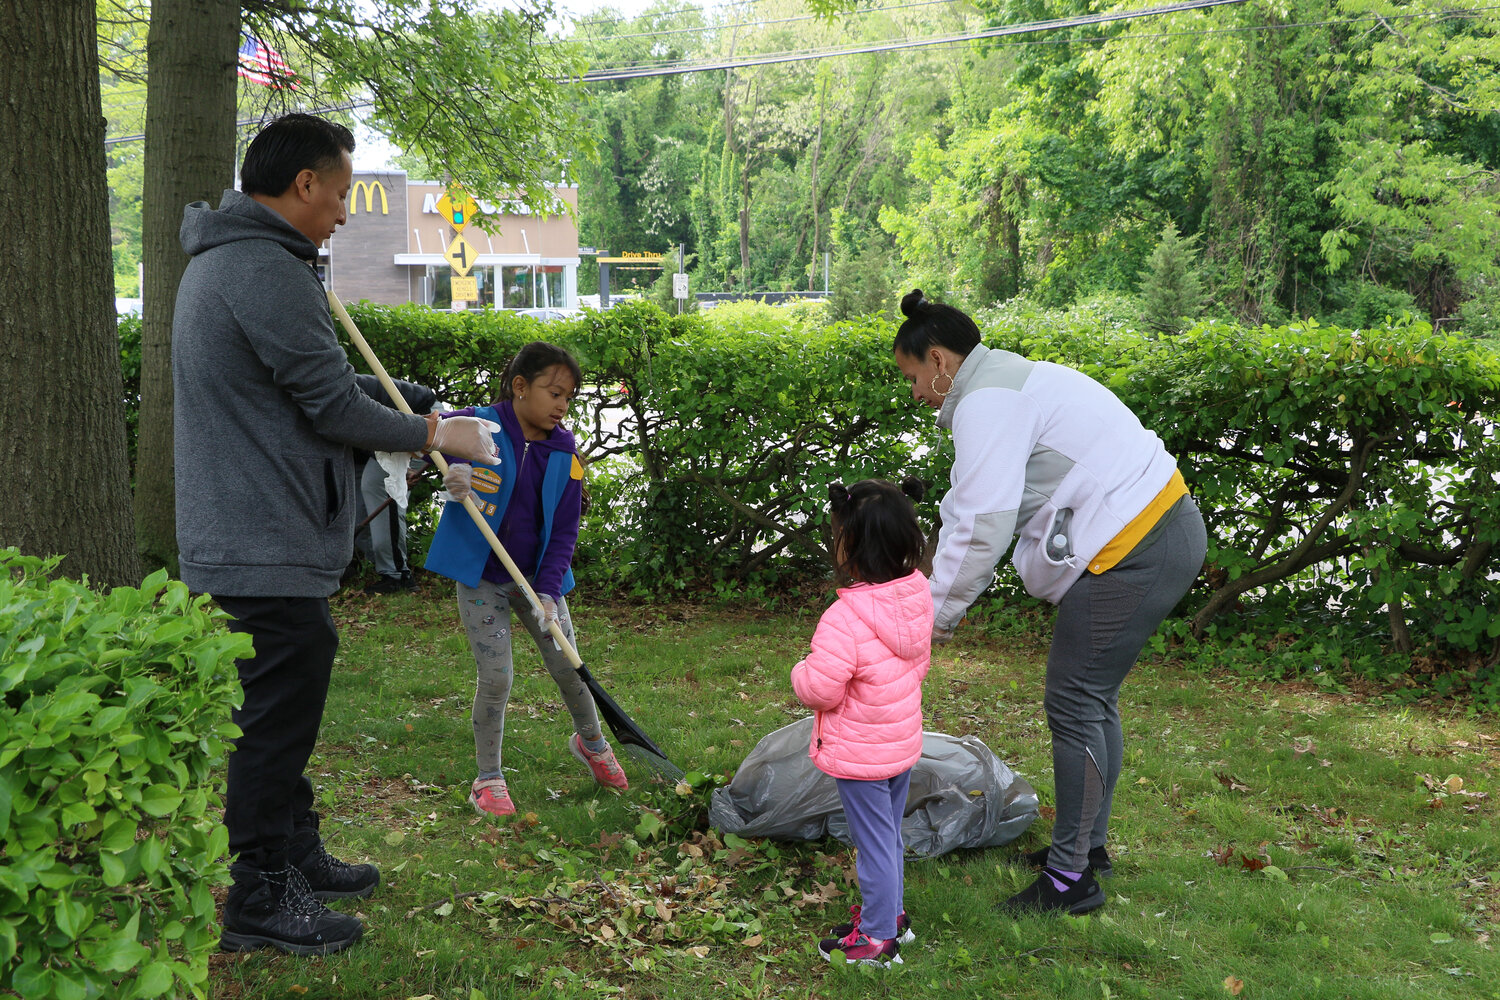 Joany and Miguel Garcia-Tzul, parents of Adriana and Girl Scout Gabriella, working hard to beautify their neighborhood.